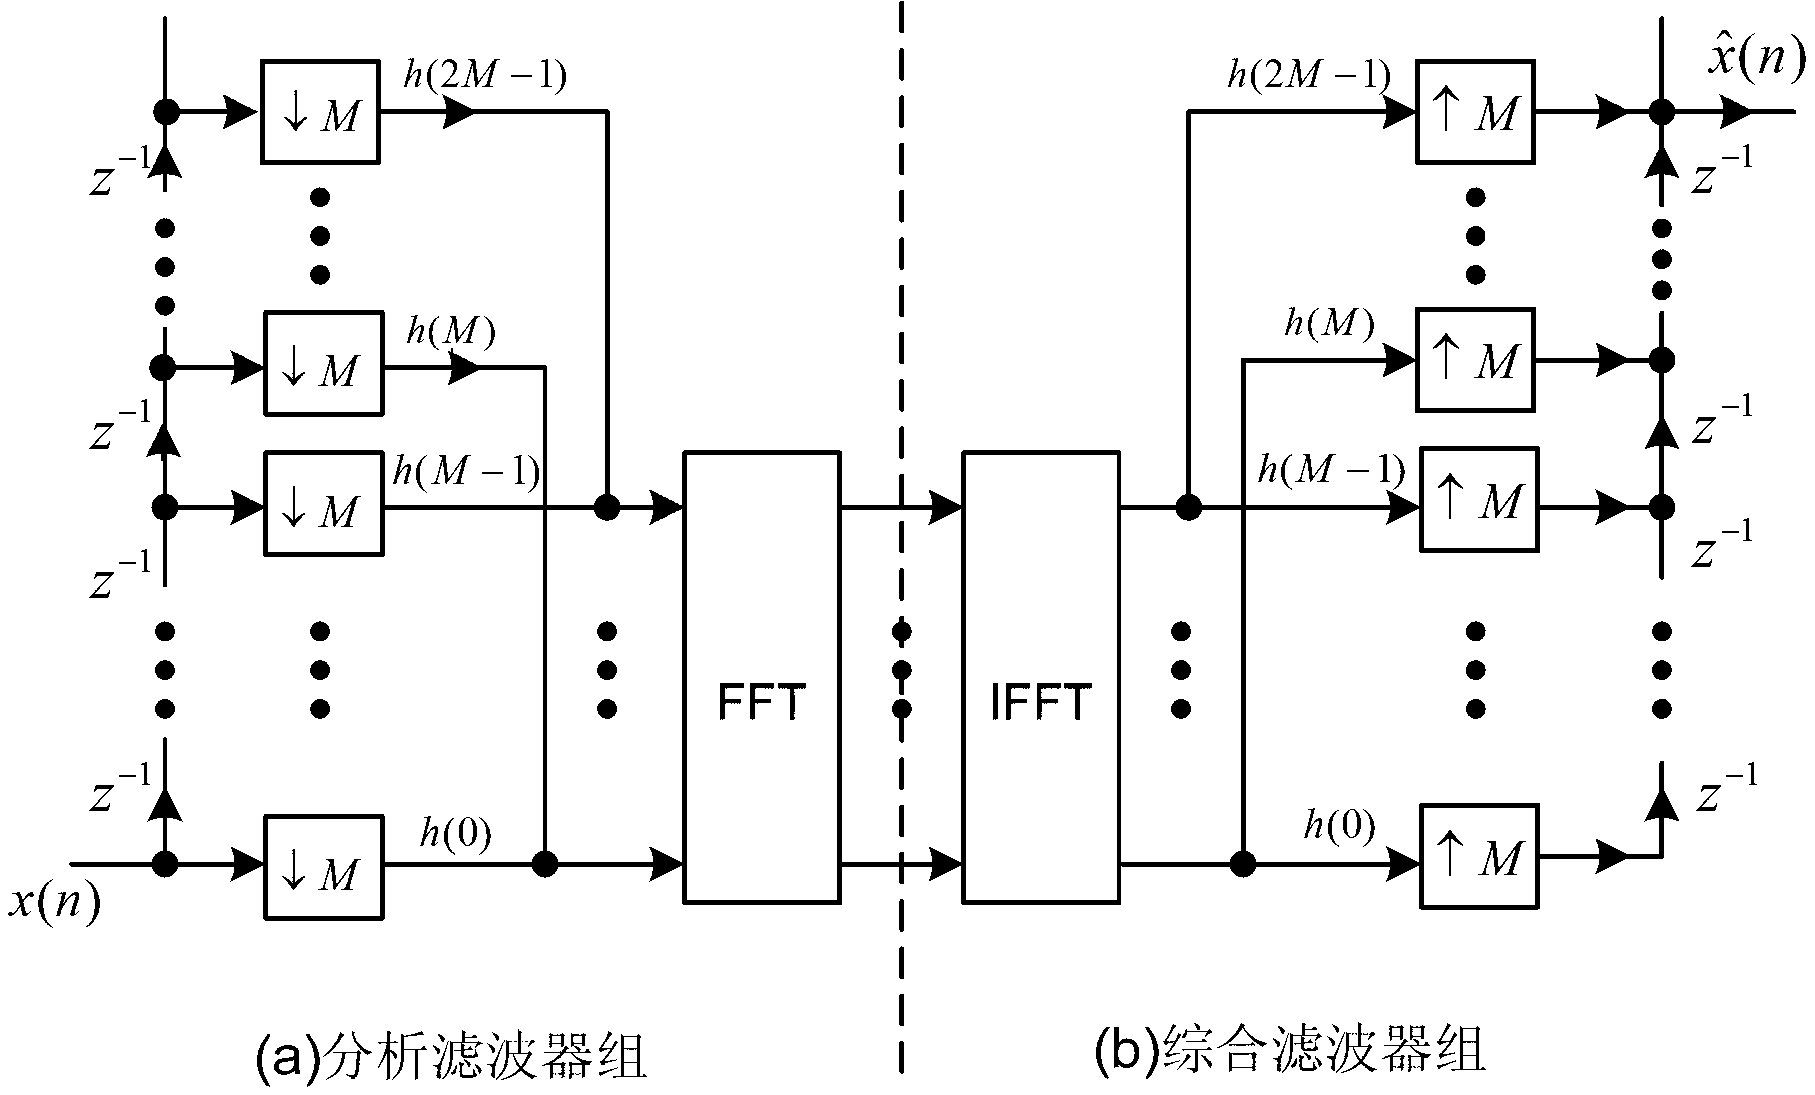 Filter bank multicarrier modulation system and design method thereof